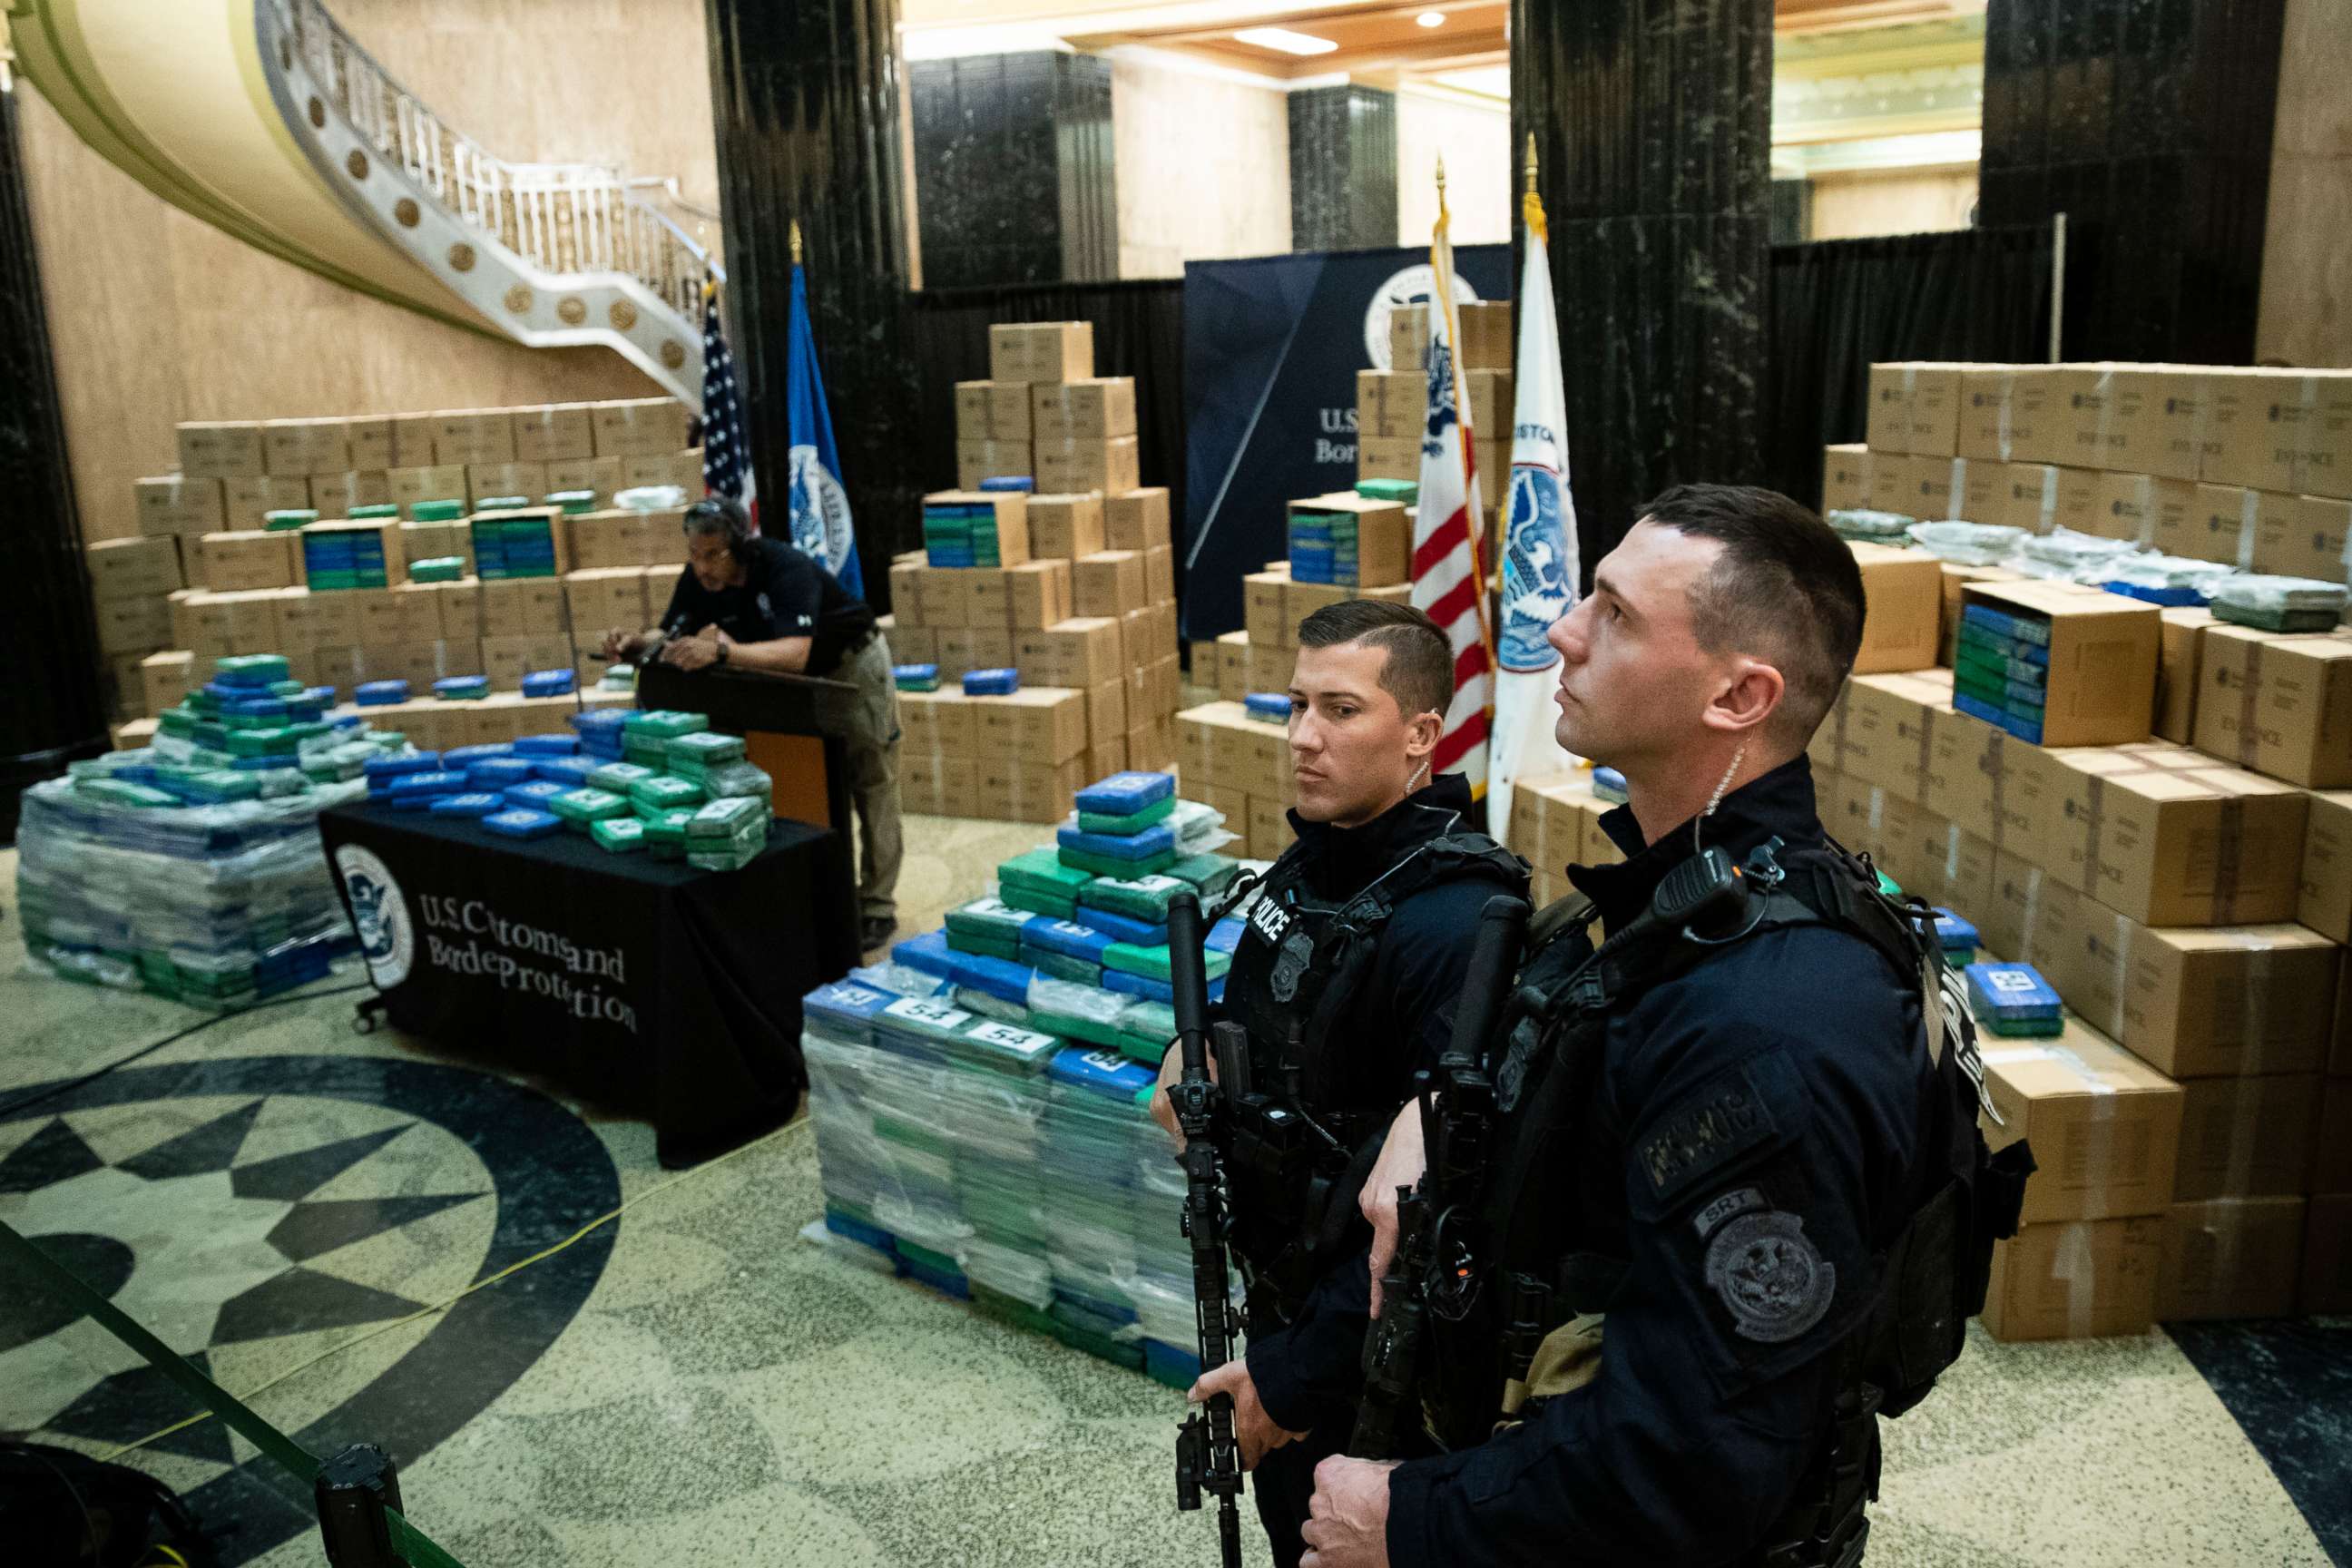 PHOTO: Officers stand guard over a fraction of the cocaine seized from a ship at a Philadelphia port ahead of a news conference at the U.S. Custom House in Philadelphia, June 21, 2019.